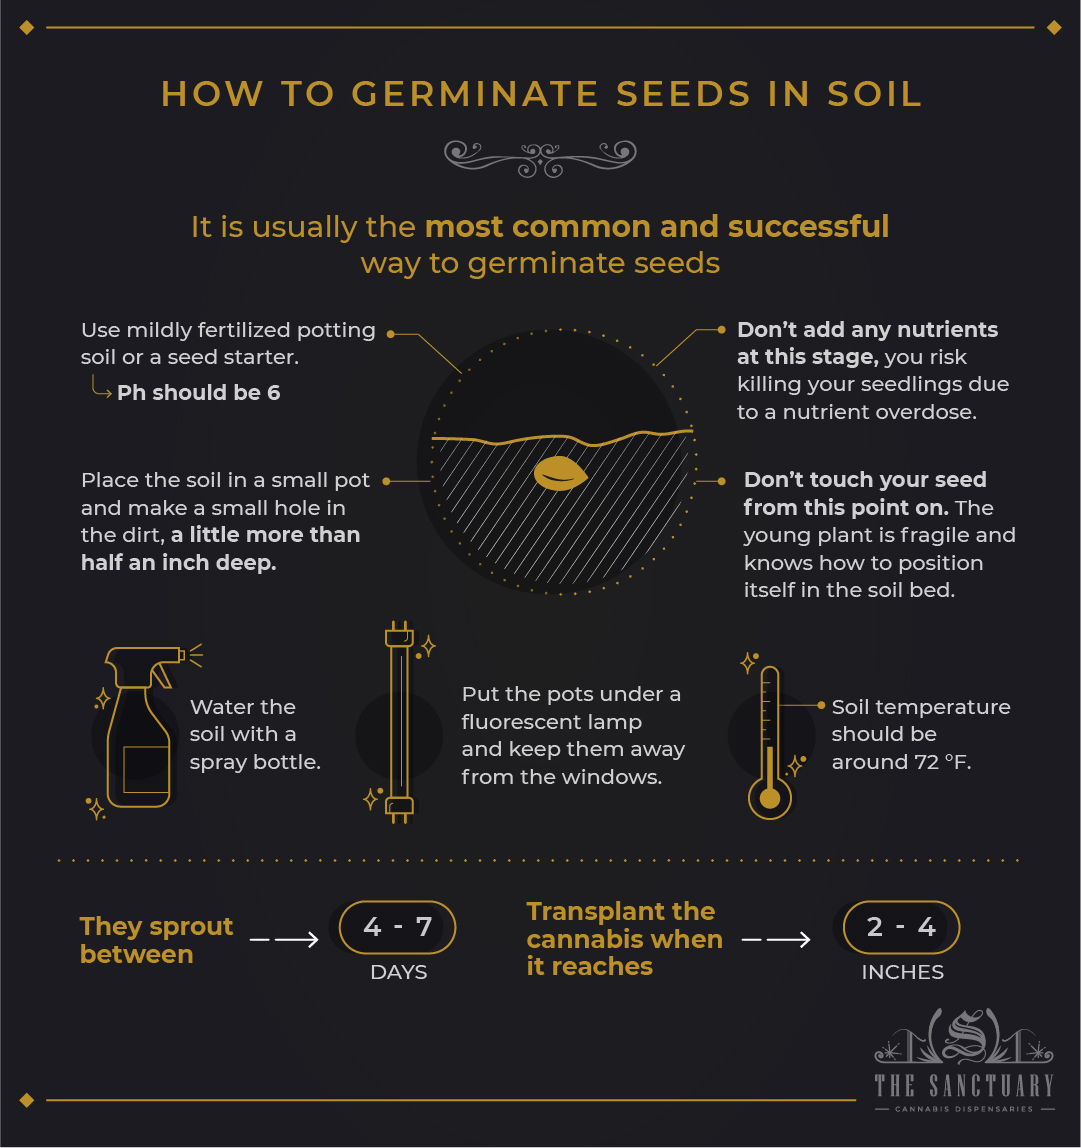 How to germinate seeds in soil